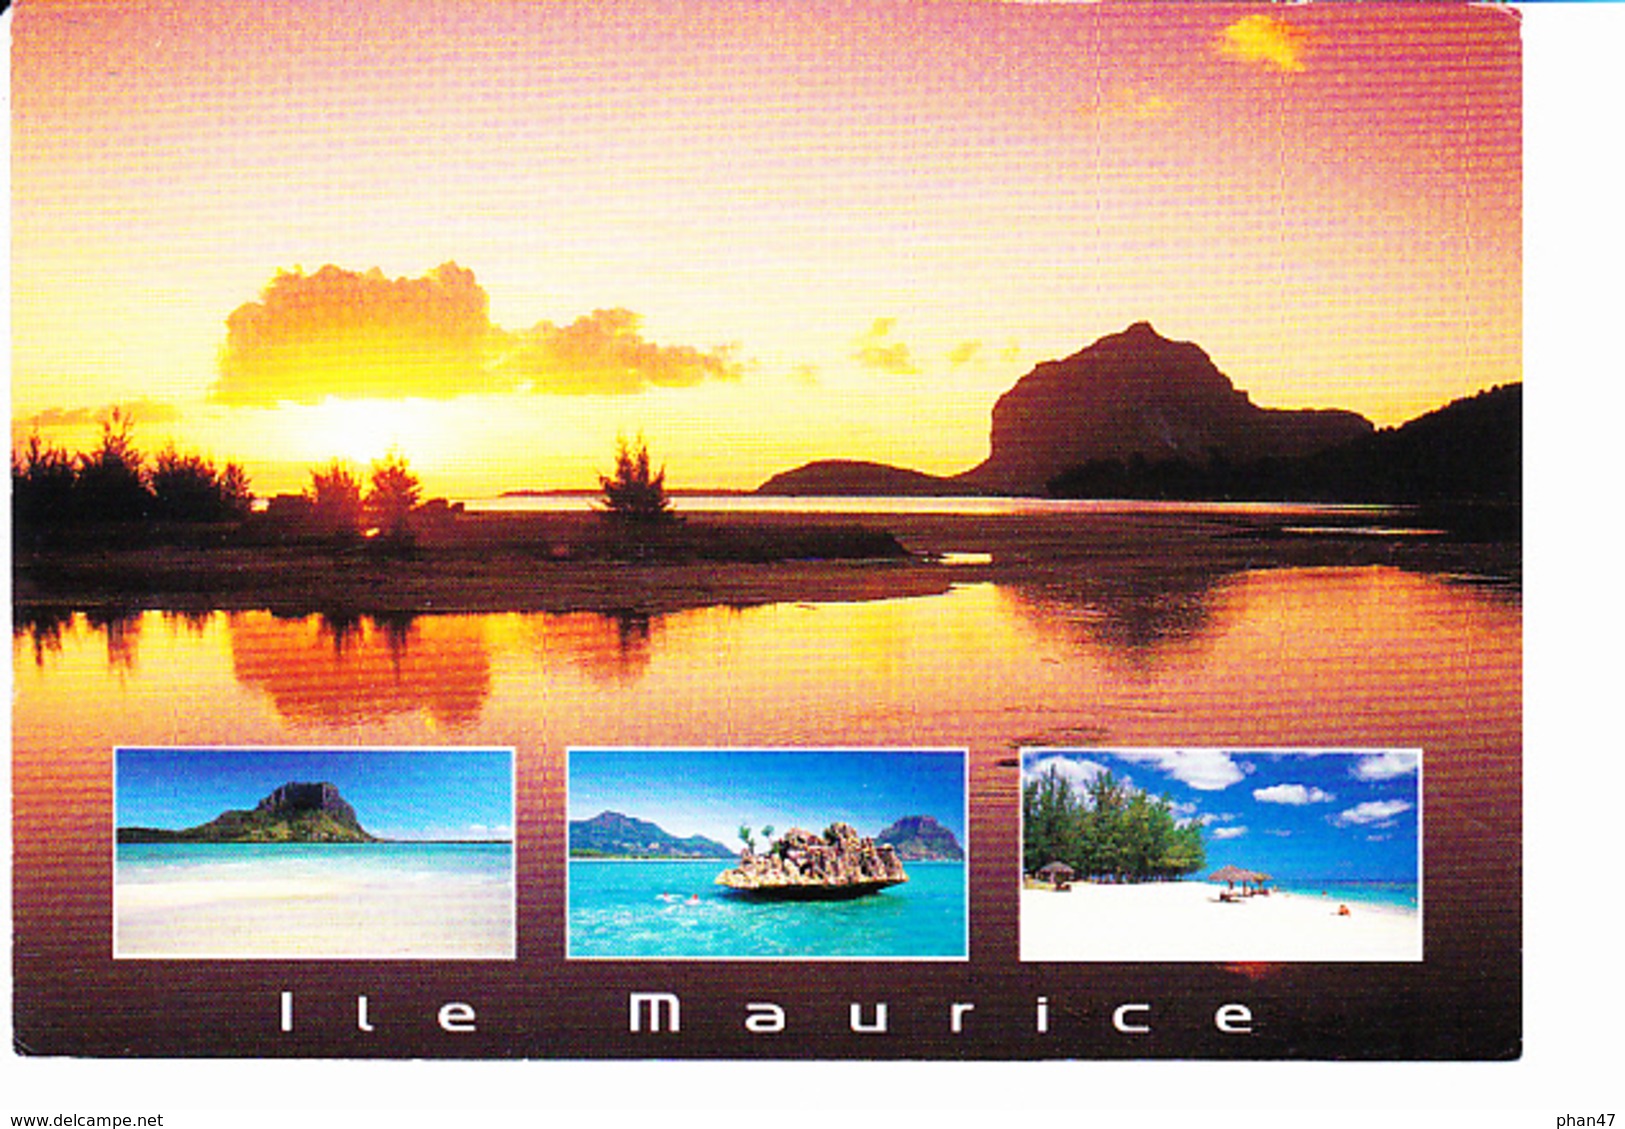 MAURICE, ÎLE MAURICE, MAURITUS, Le Morne, Plage, Rochers, Ed. Arts Distributions 1980 Environ - Maurice